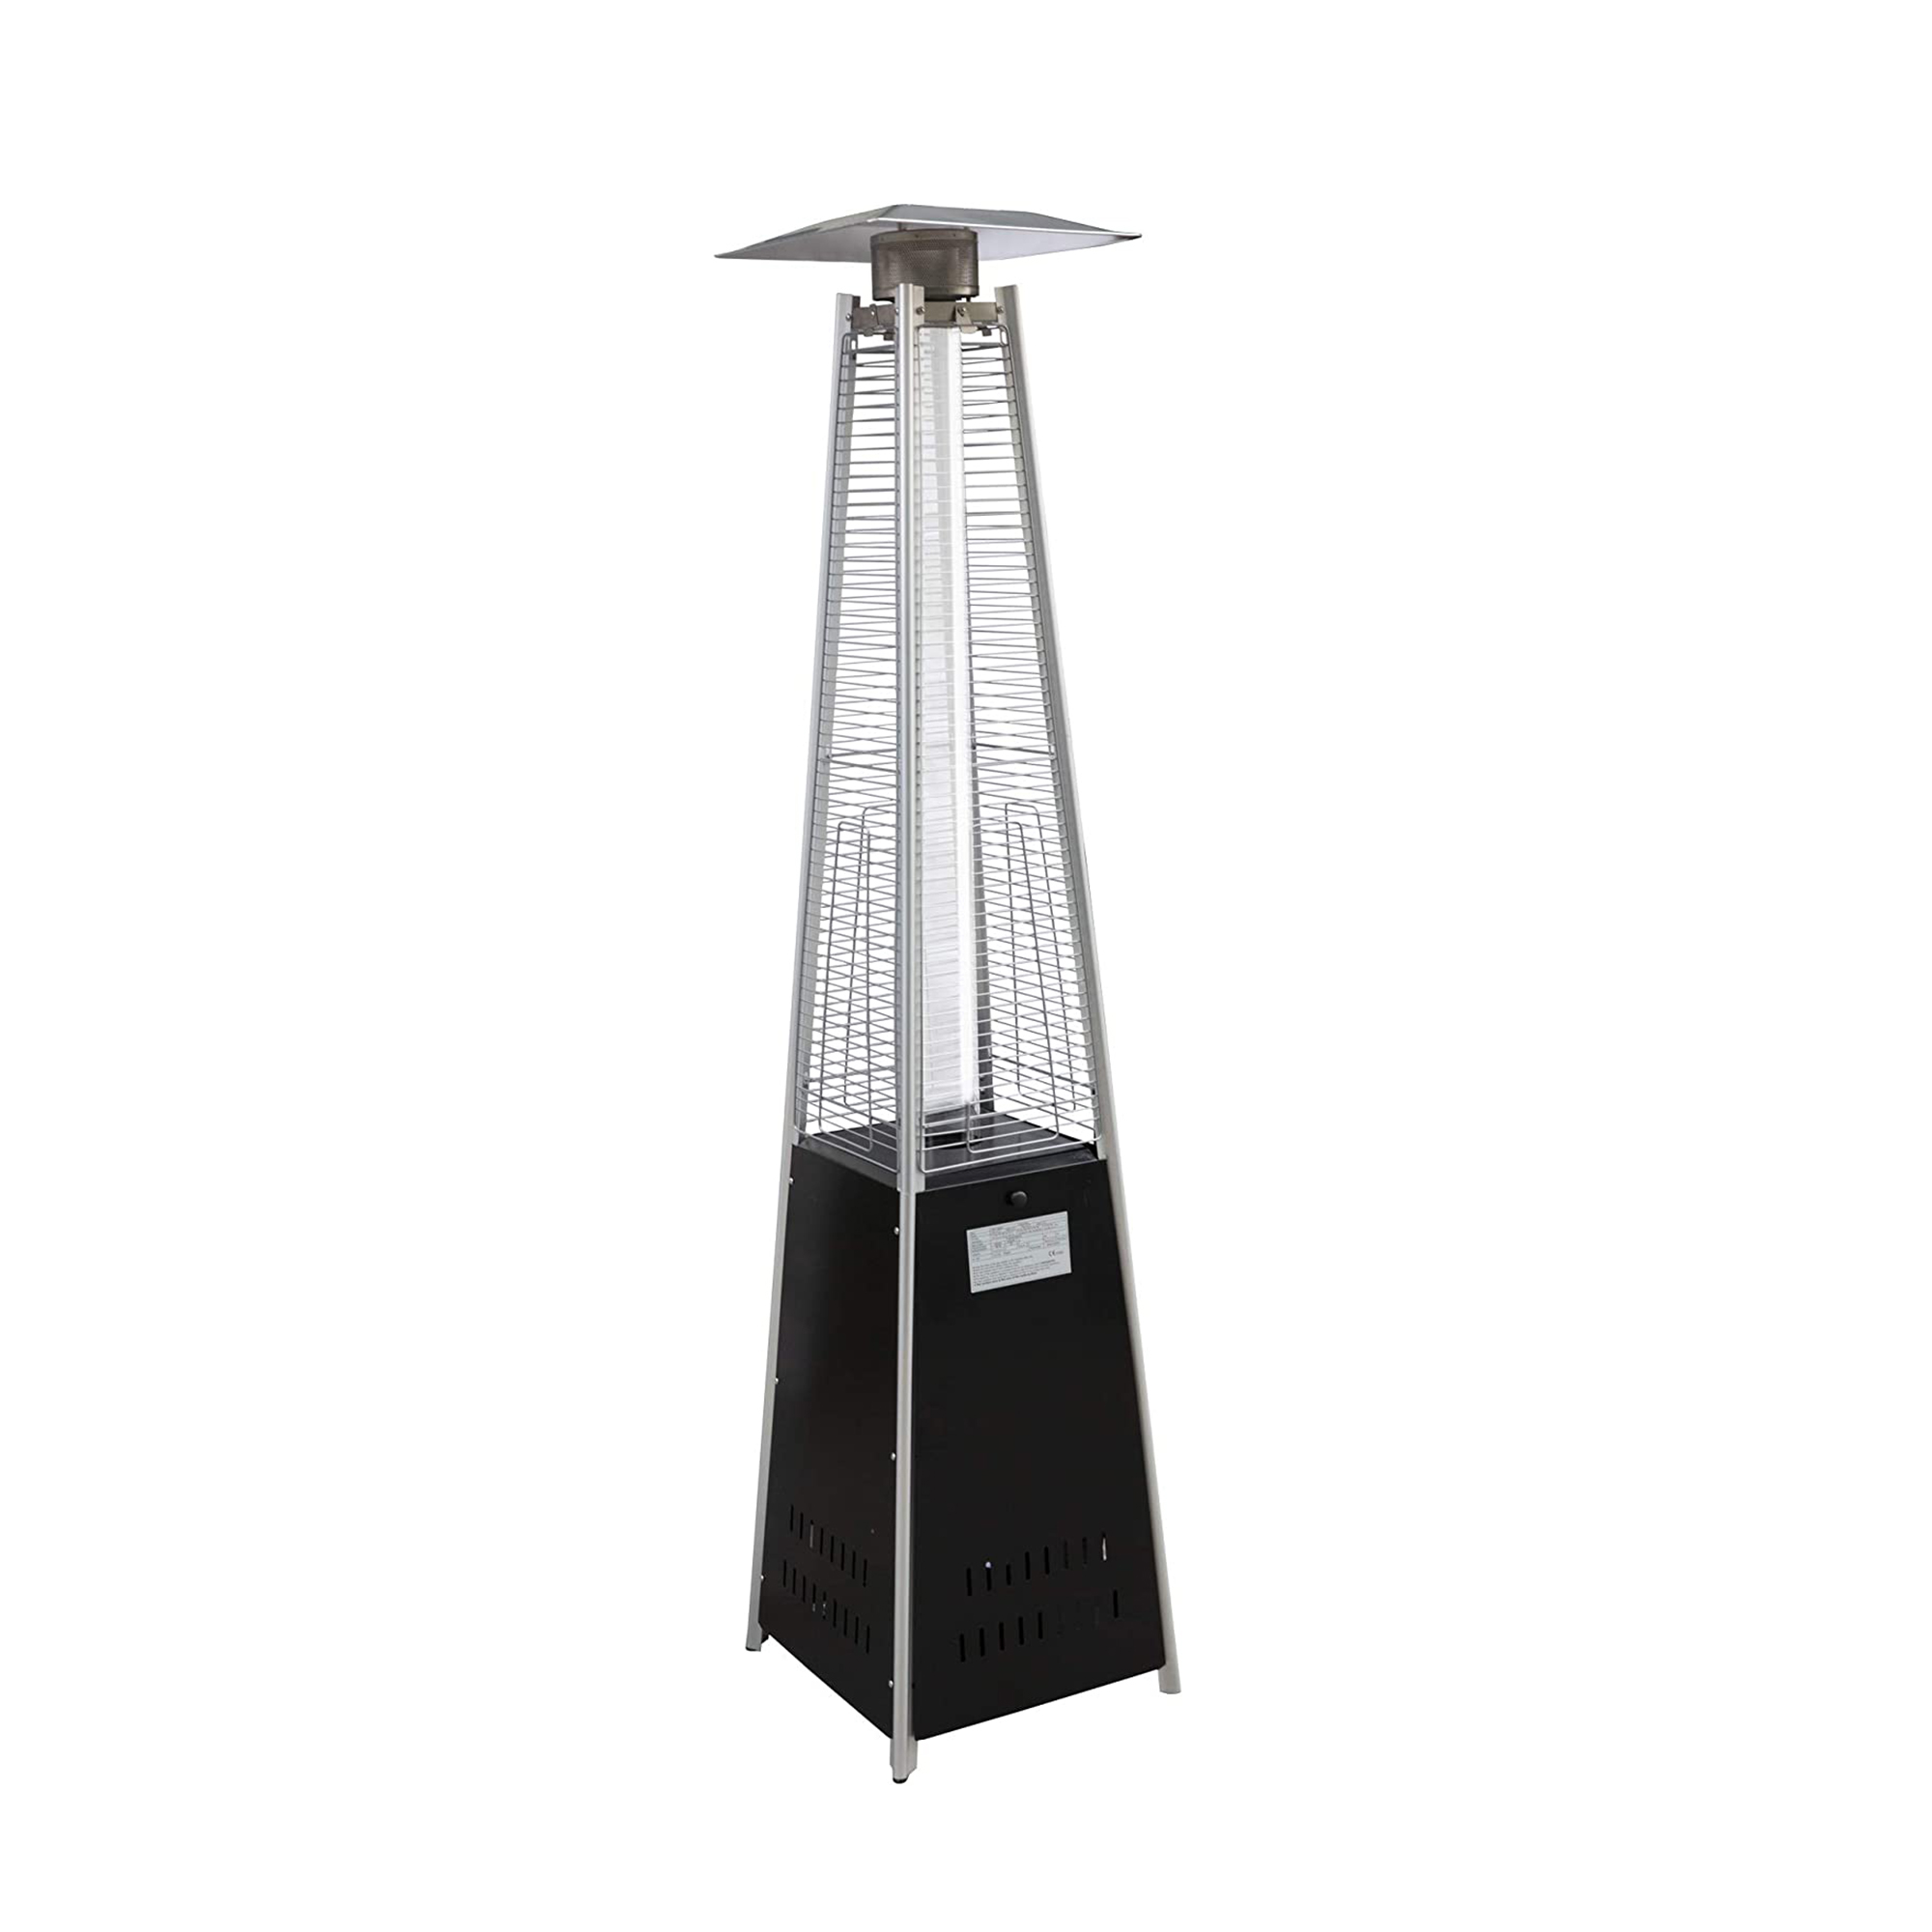 KARMAS PRODUCT Outdoor Patio Heater, Pyramid Standing Gas LP Propane Heater with Wheels 87 inches Tall 42000 BTU for Commercial Courtyard (Black) - image 1 of 7